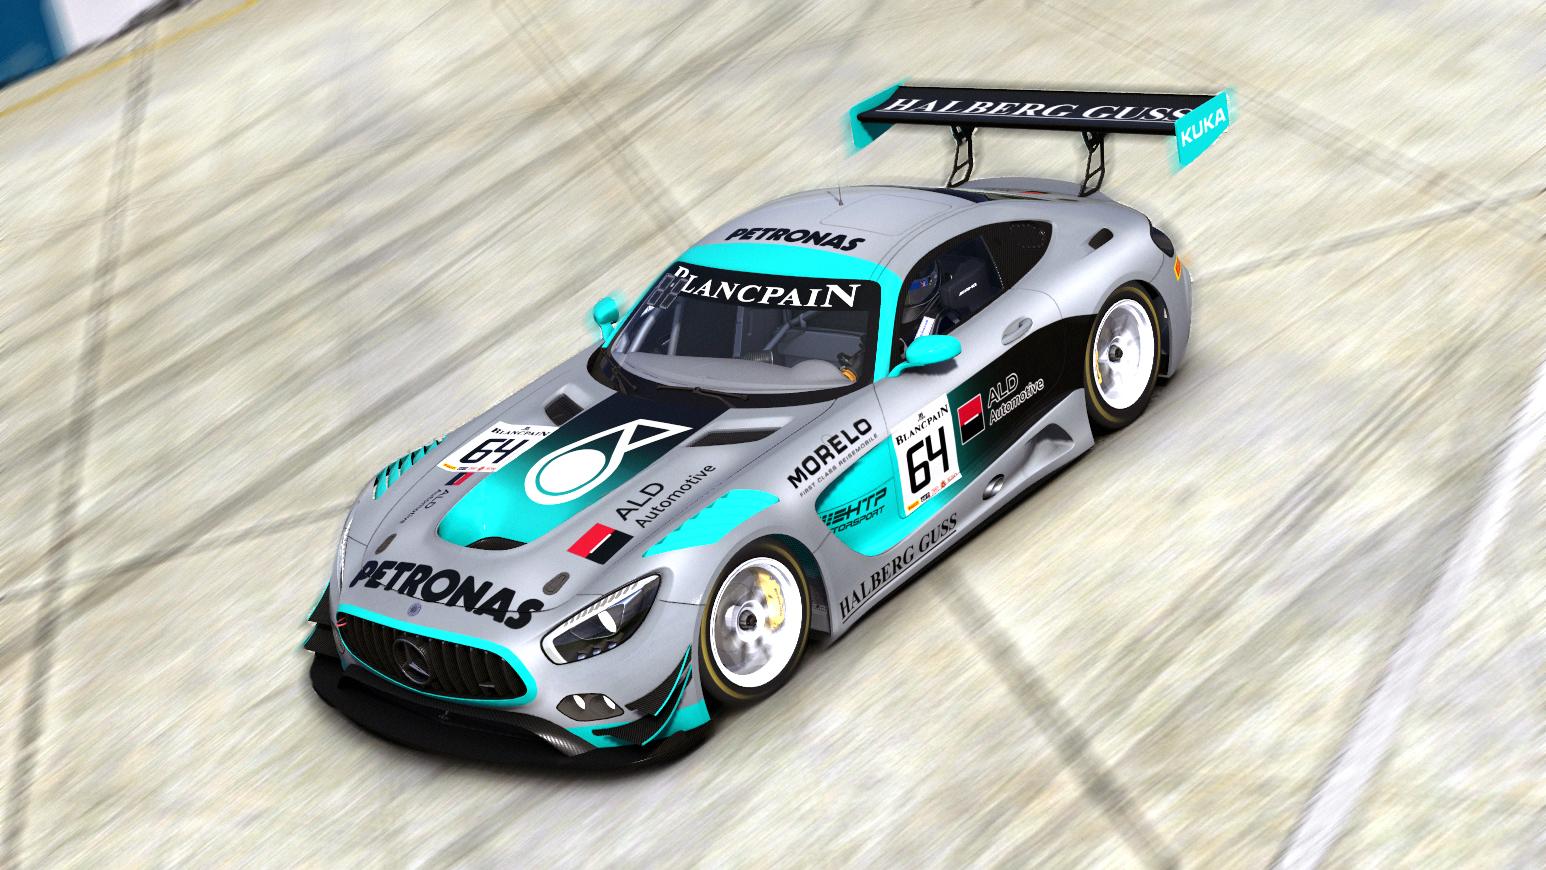 Preview of  #86 HTP Motorsport PETRONAS (Spa 24h) by Justin S Davis